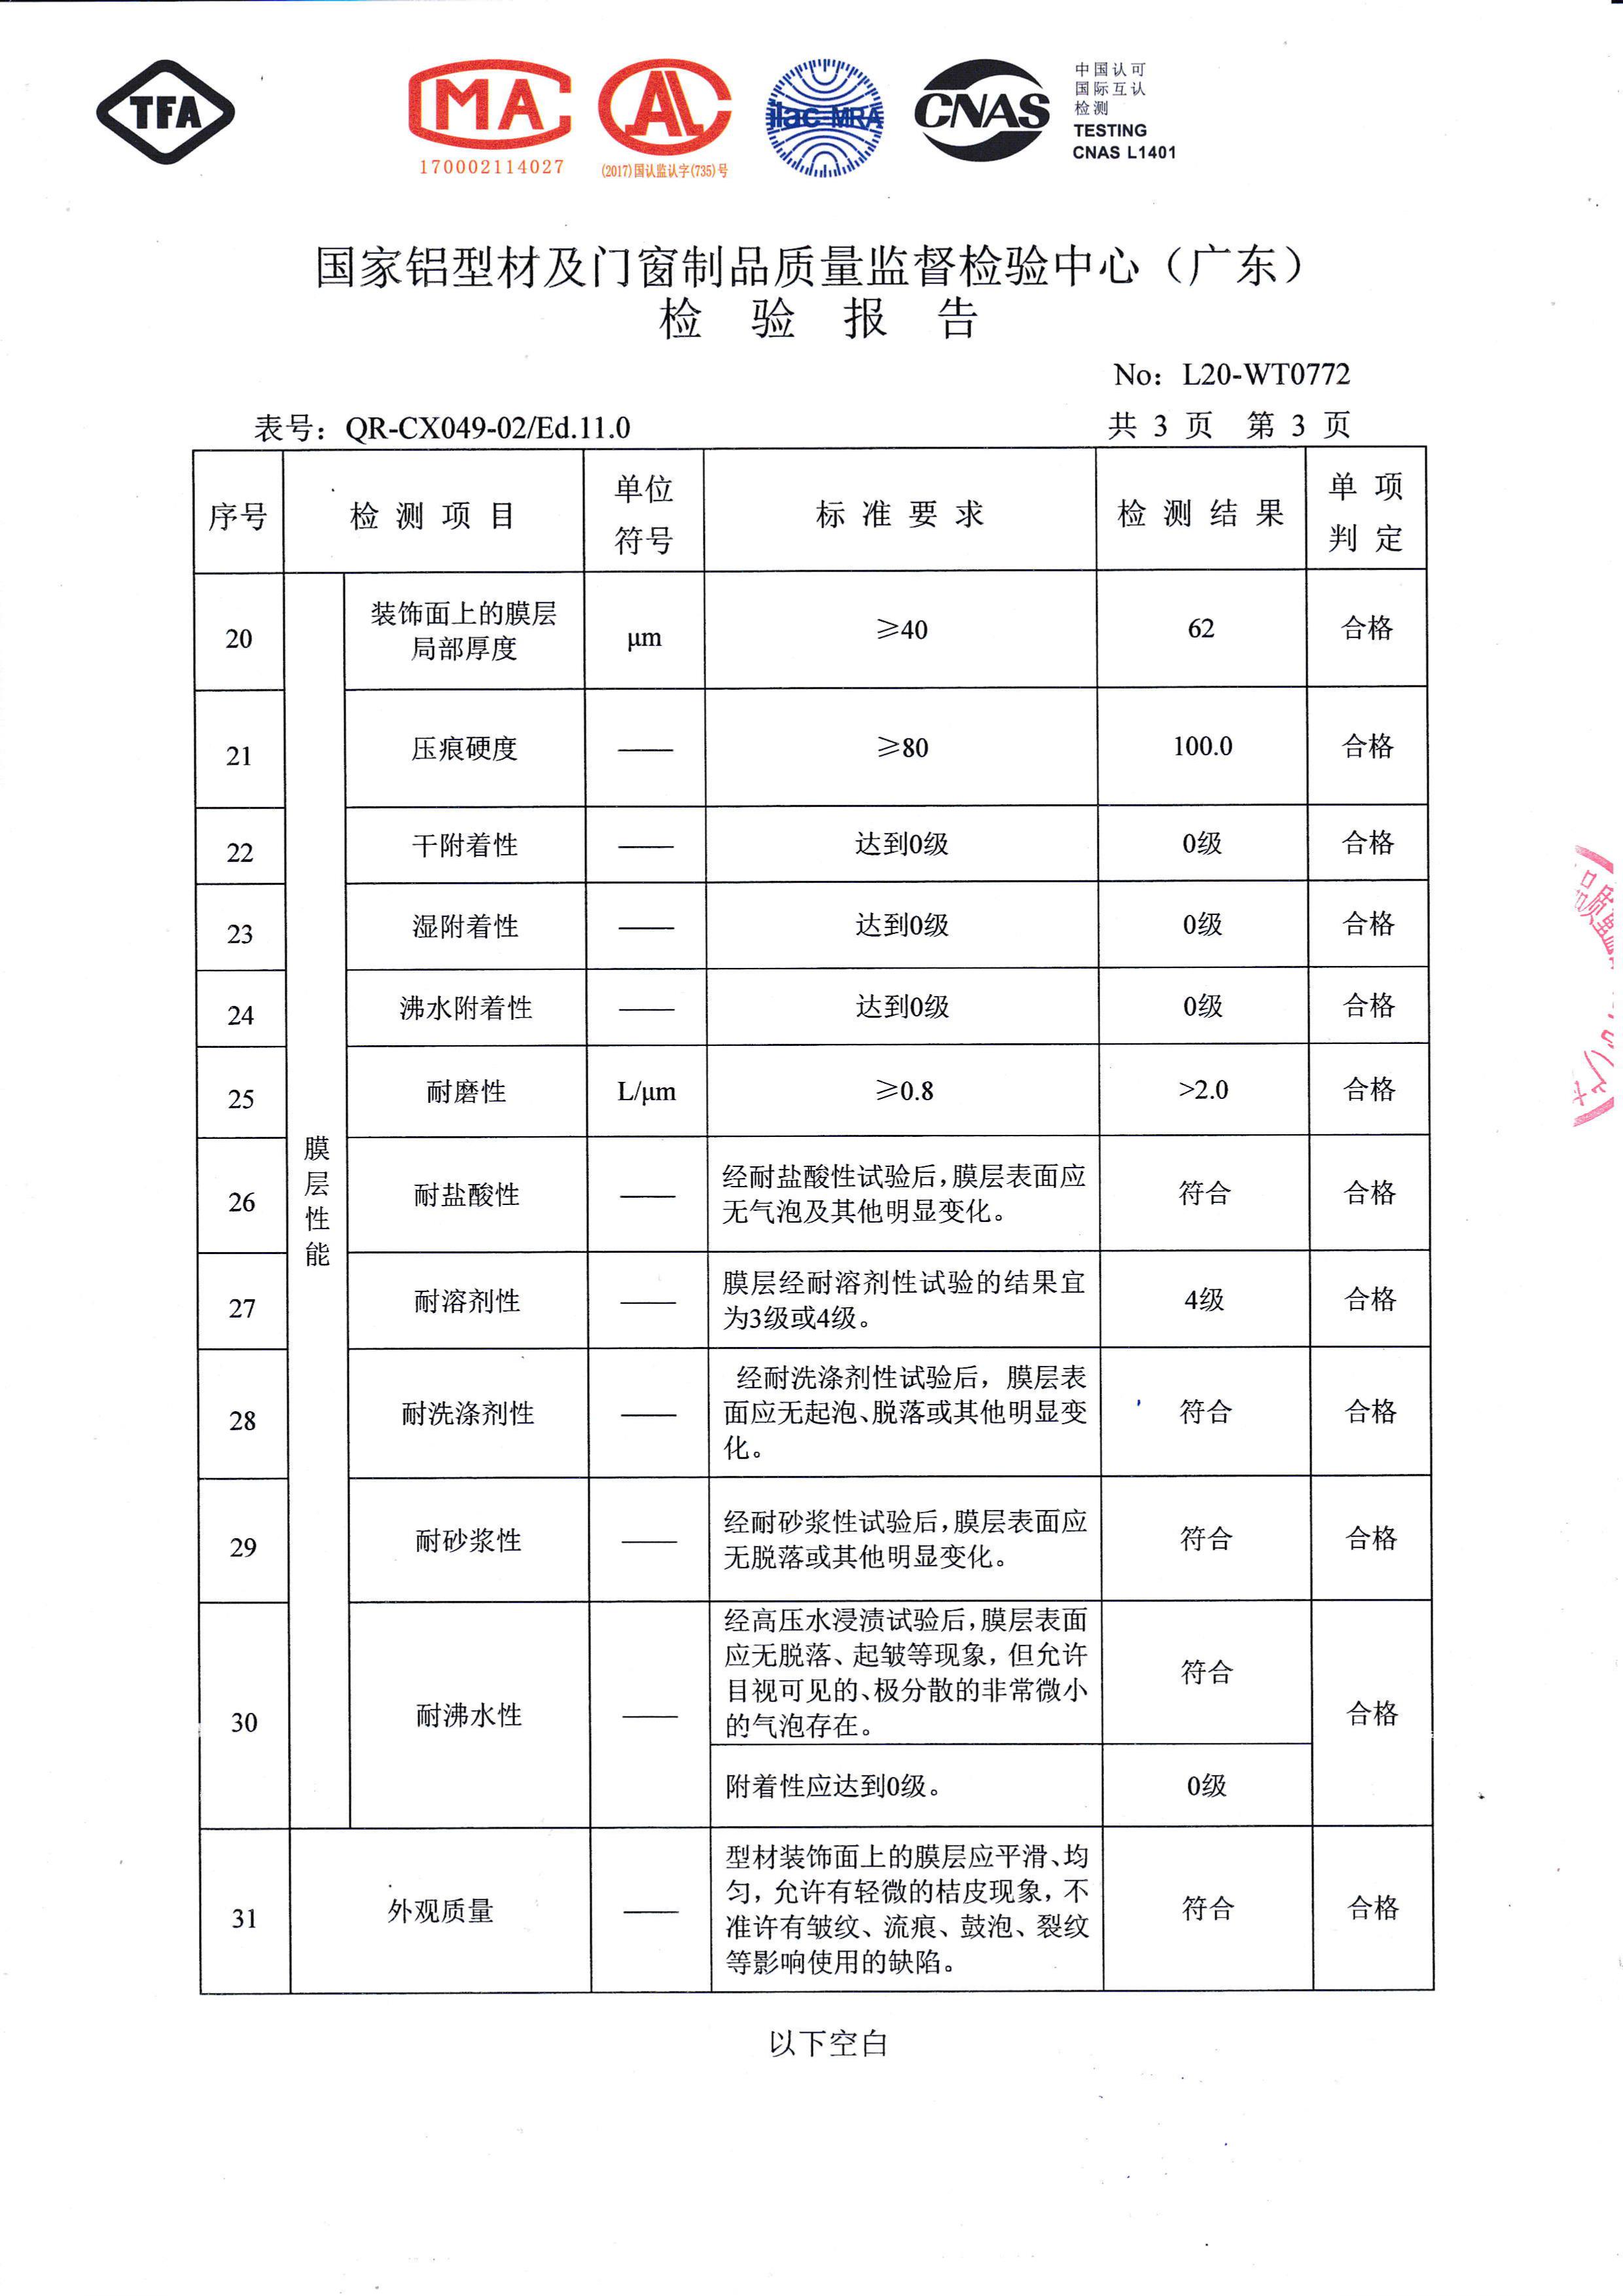 Inspection report of powder spraying profile (4)